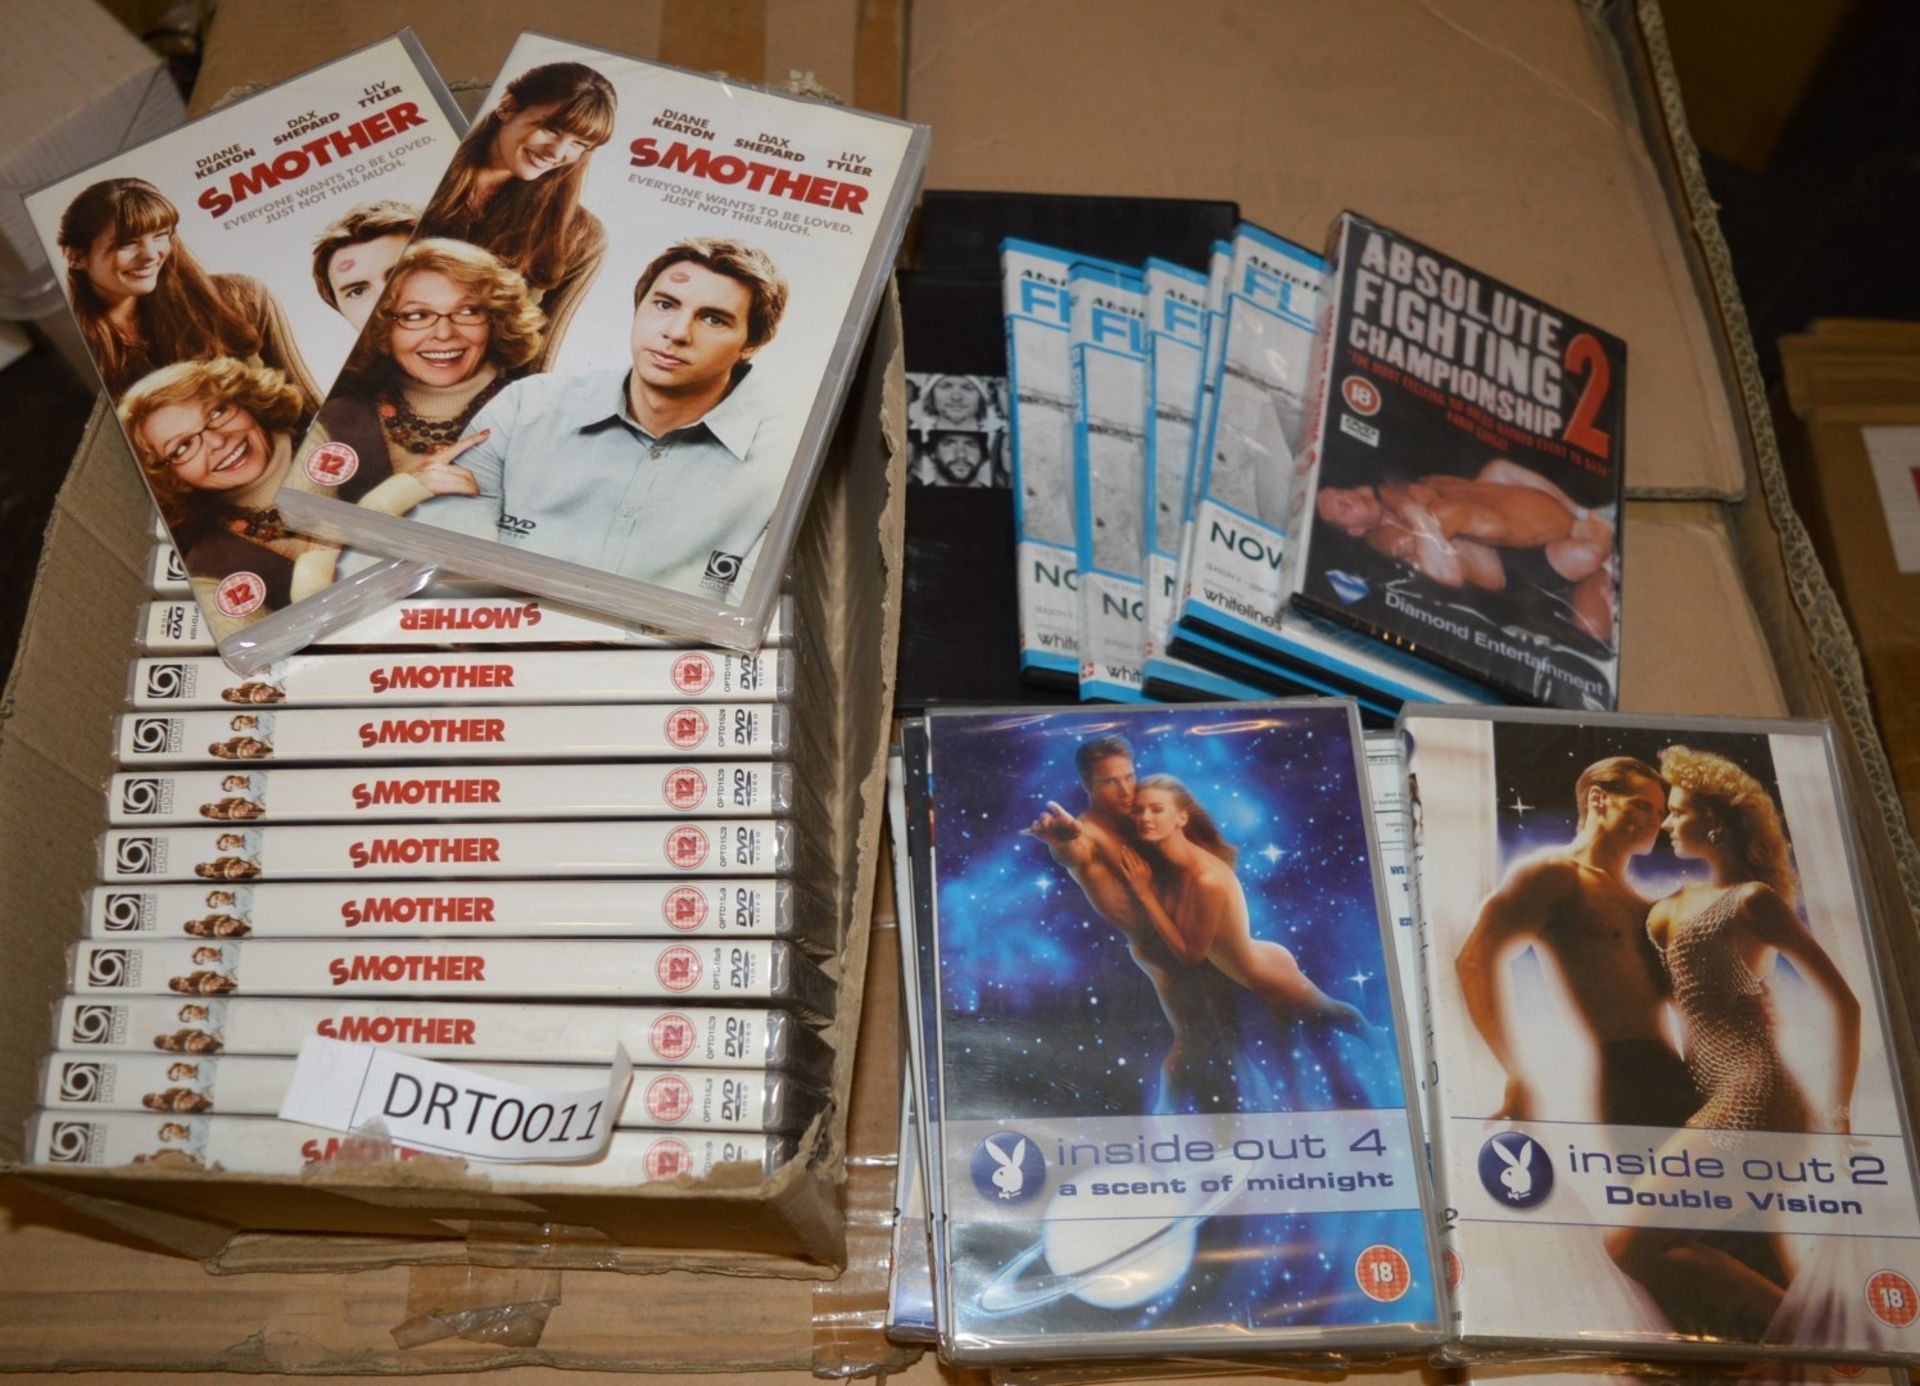 44 x Various DVD Movies - Includes Adult Content - Over 18's Only - CL185 - Brand New Stock - Ref